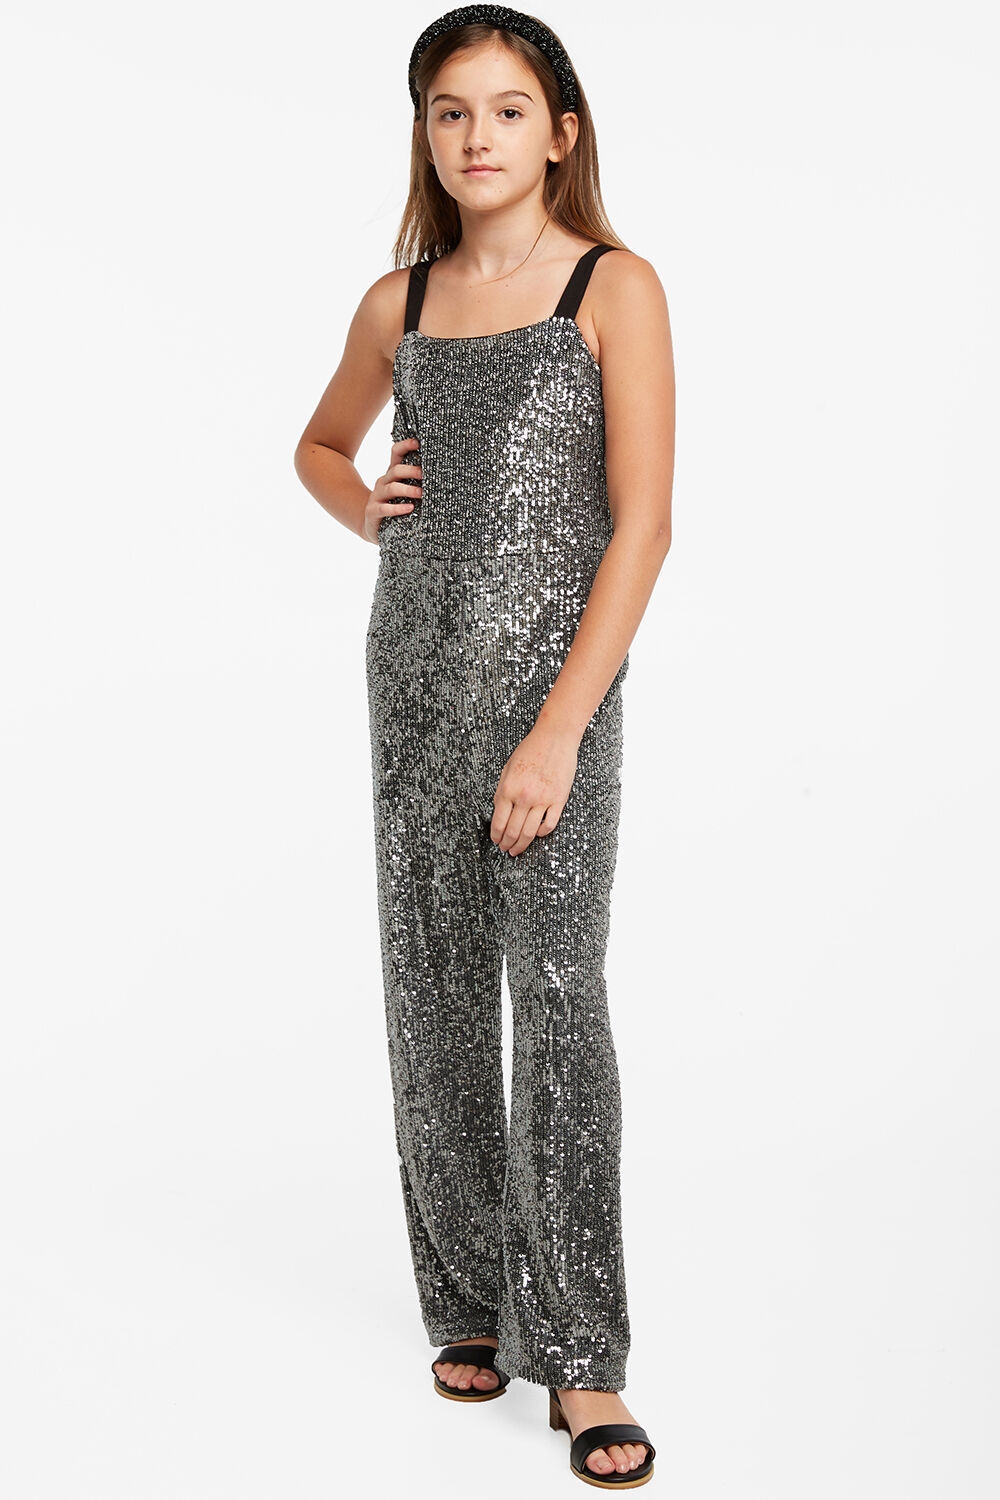 Illy Sequin Jumpsuit | Tween Girls 7-16 Playsuits & Jumpsuits | Bardot ...